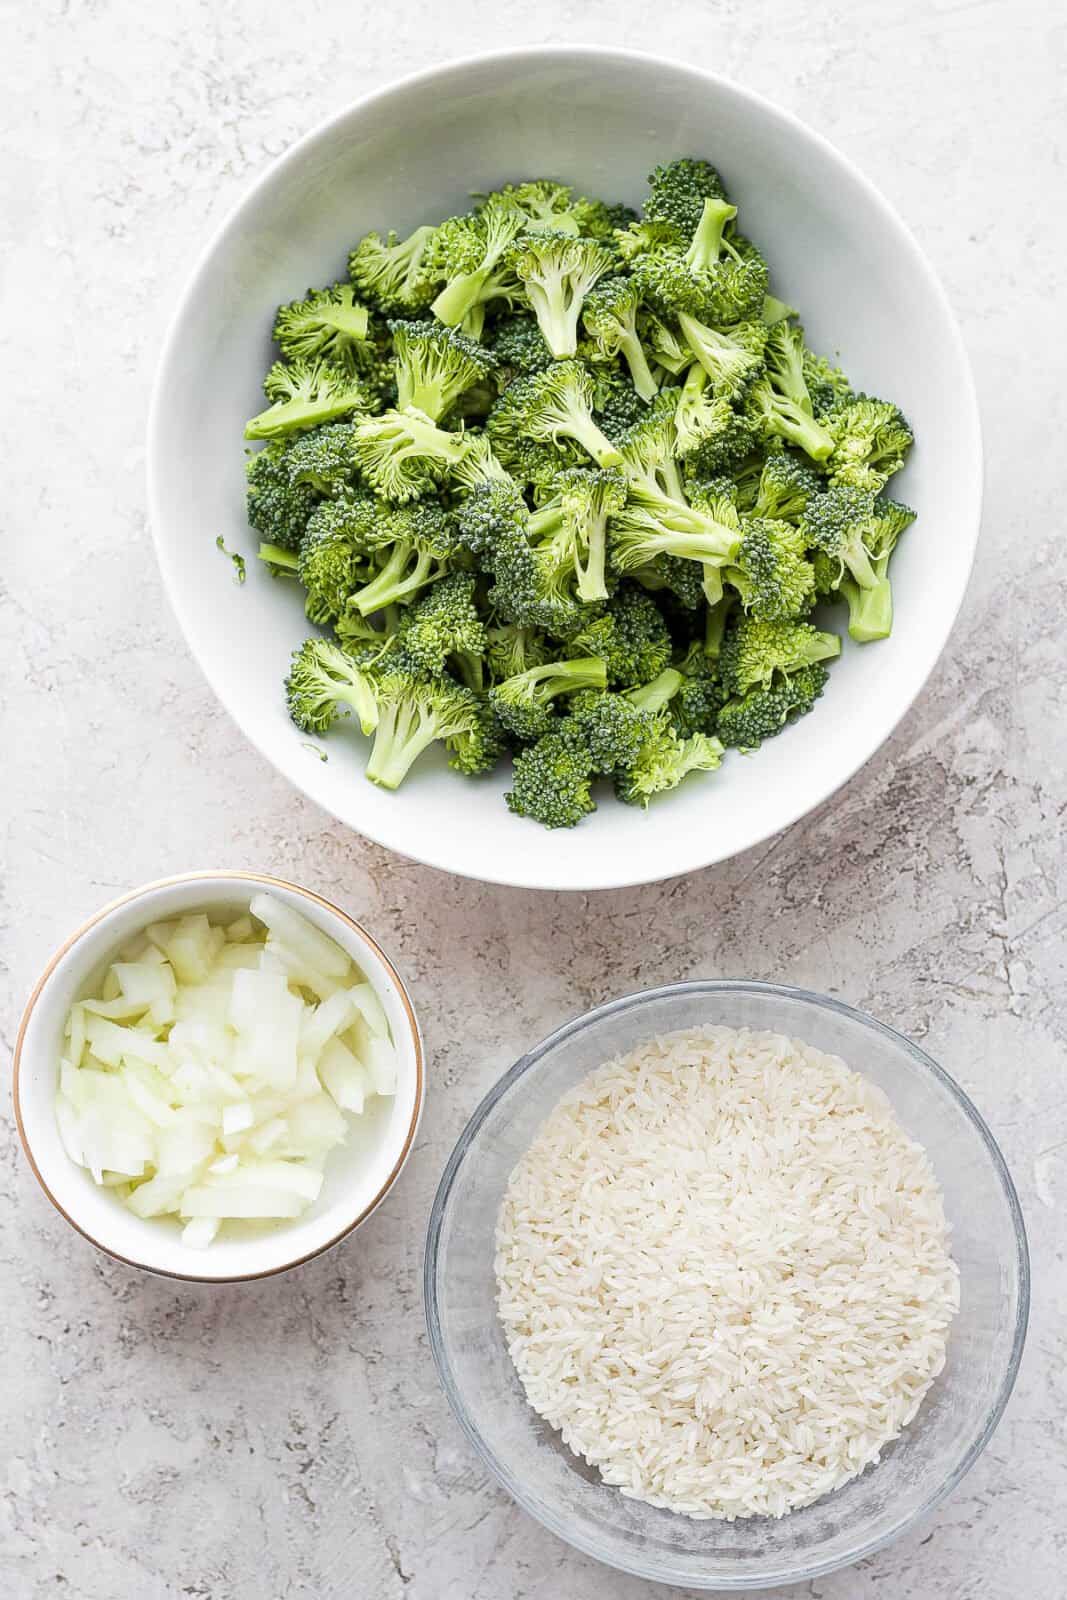 Bowls with broccoli, onion, and rice.